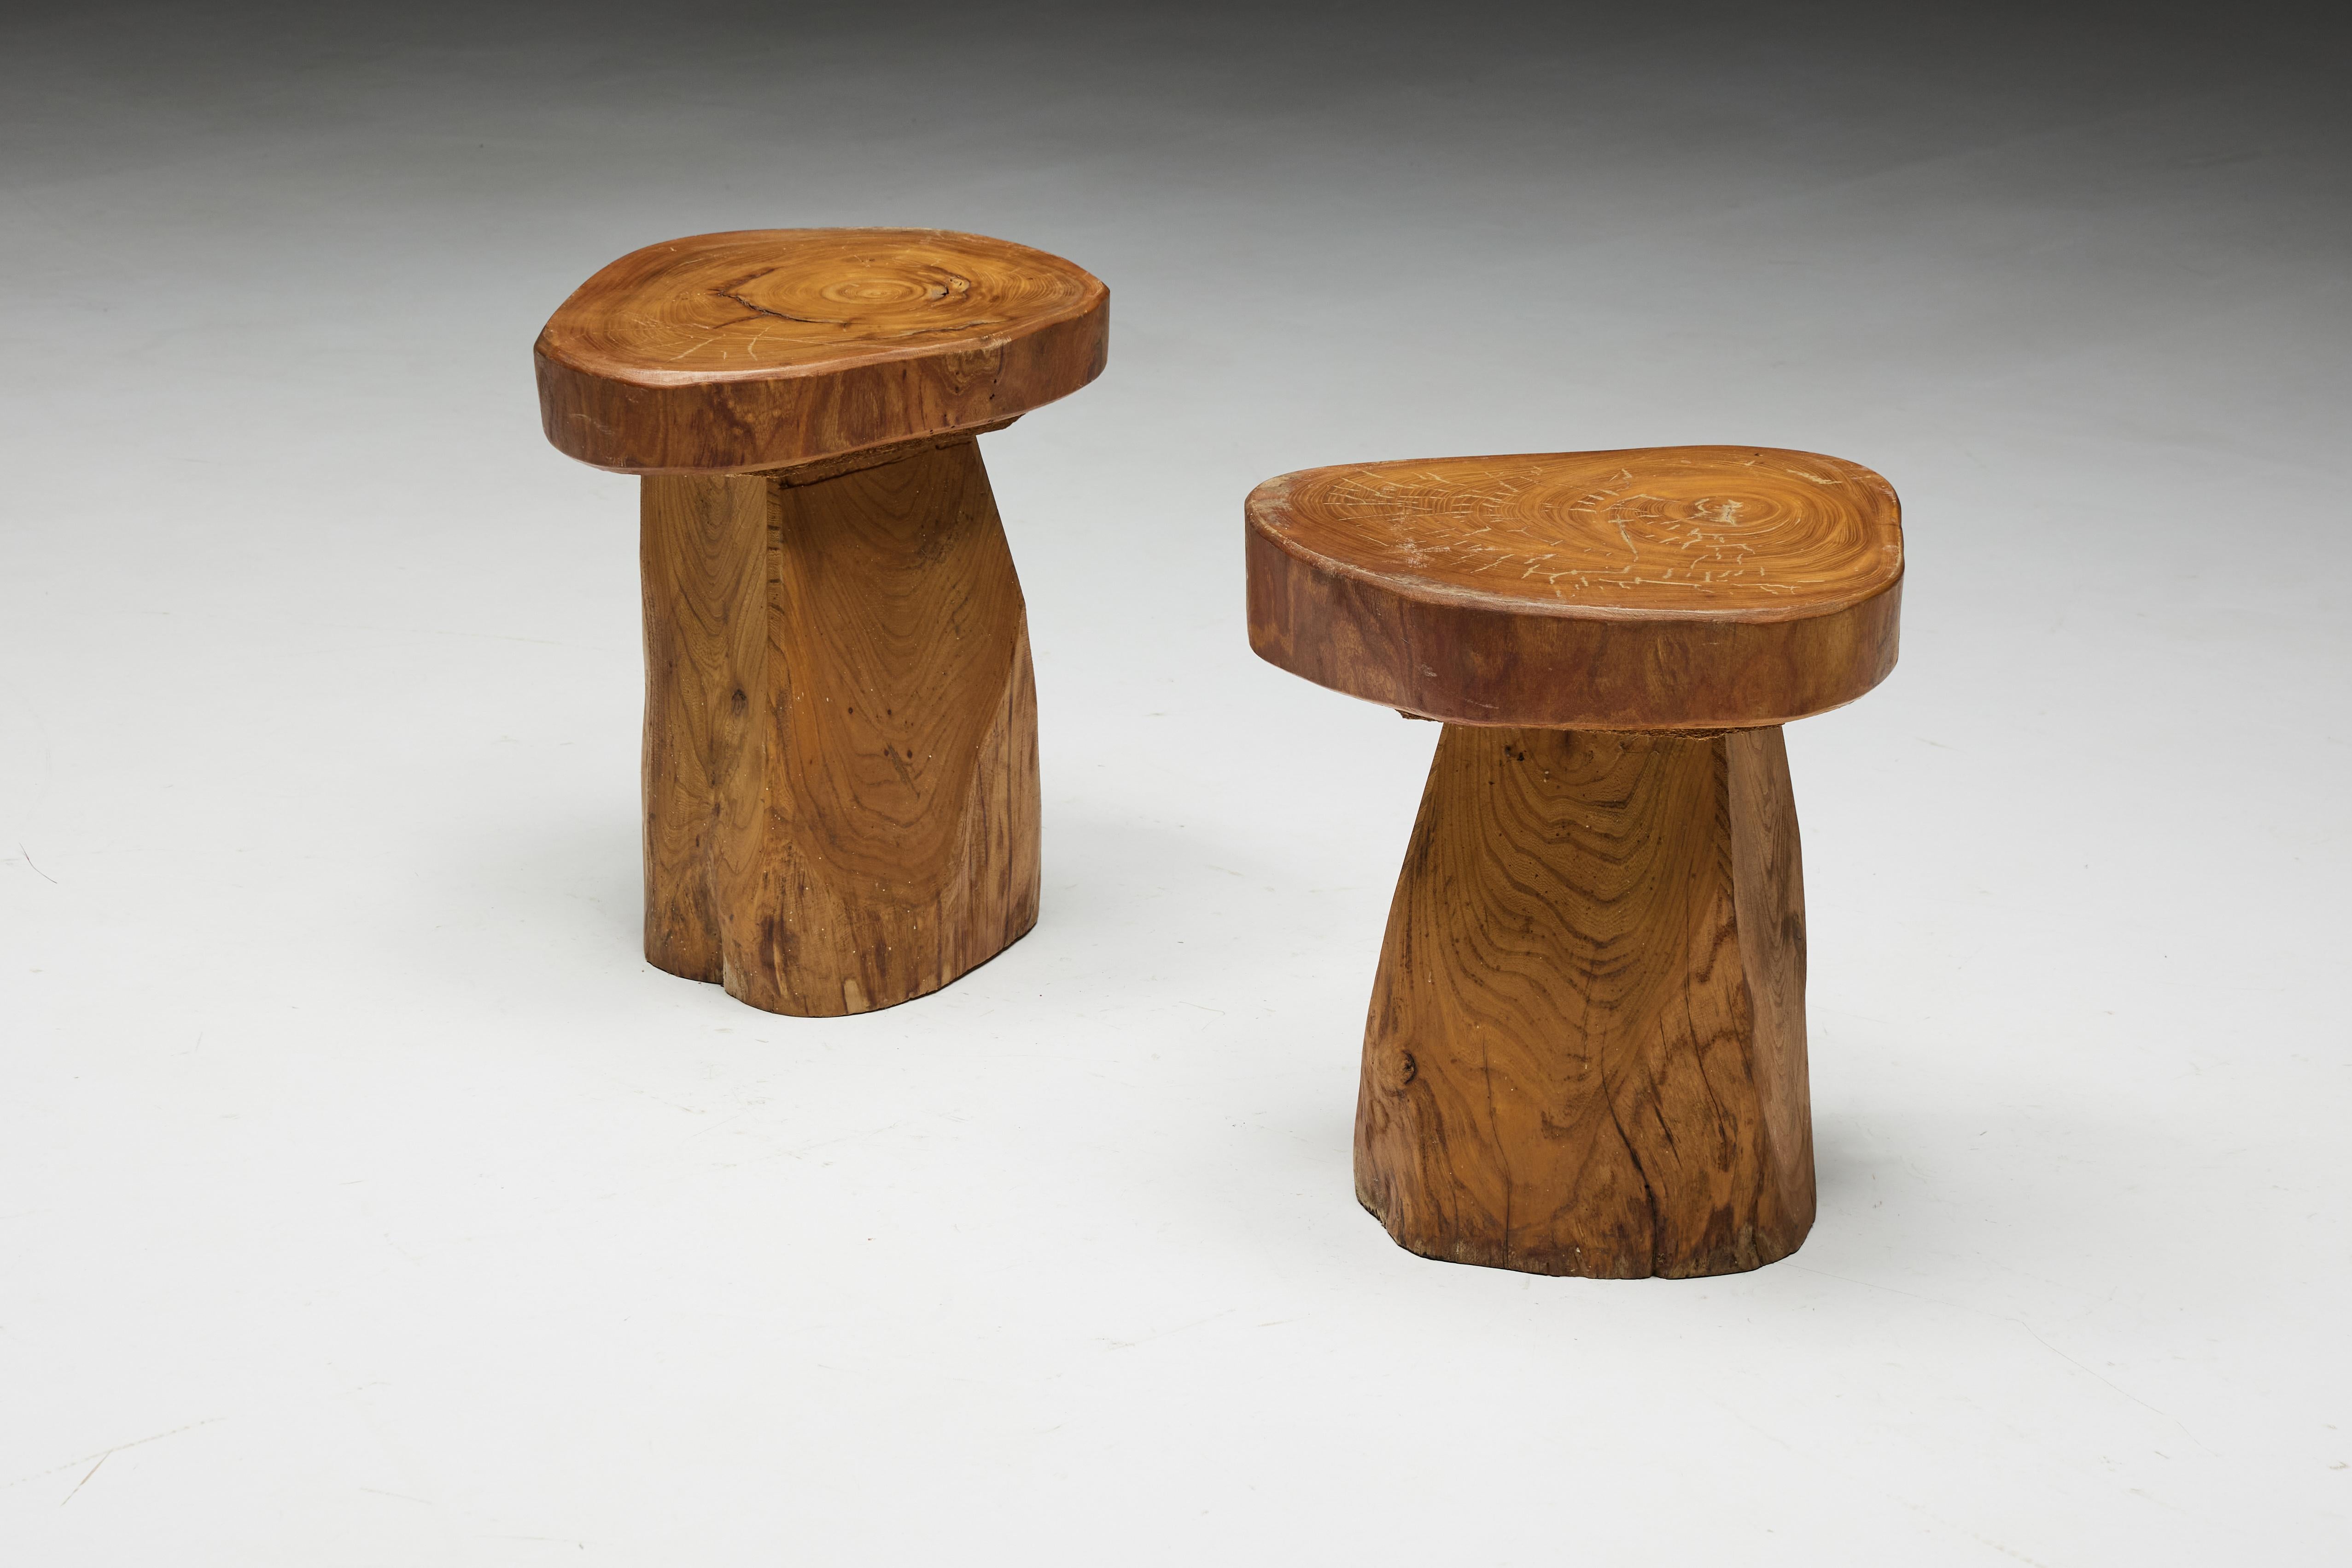 Brutalist Monoxylite Stools in the Style of Zanine Caldas, Brazil, 1970s For Sale